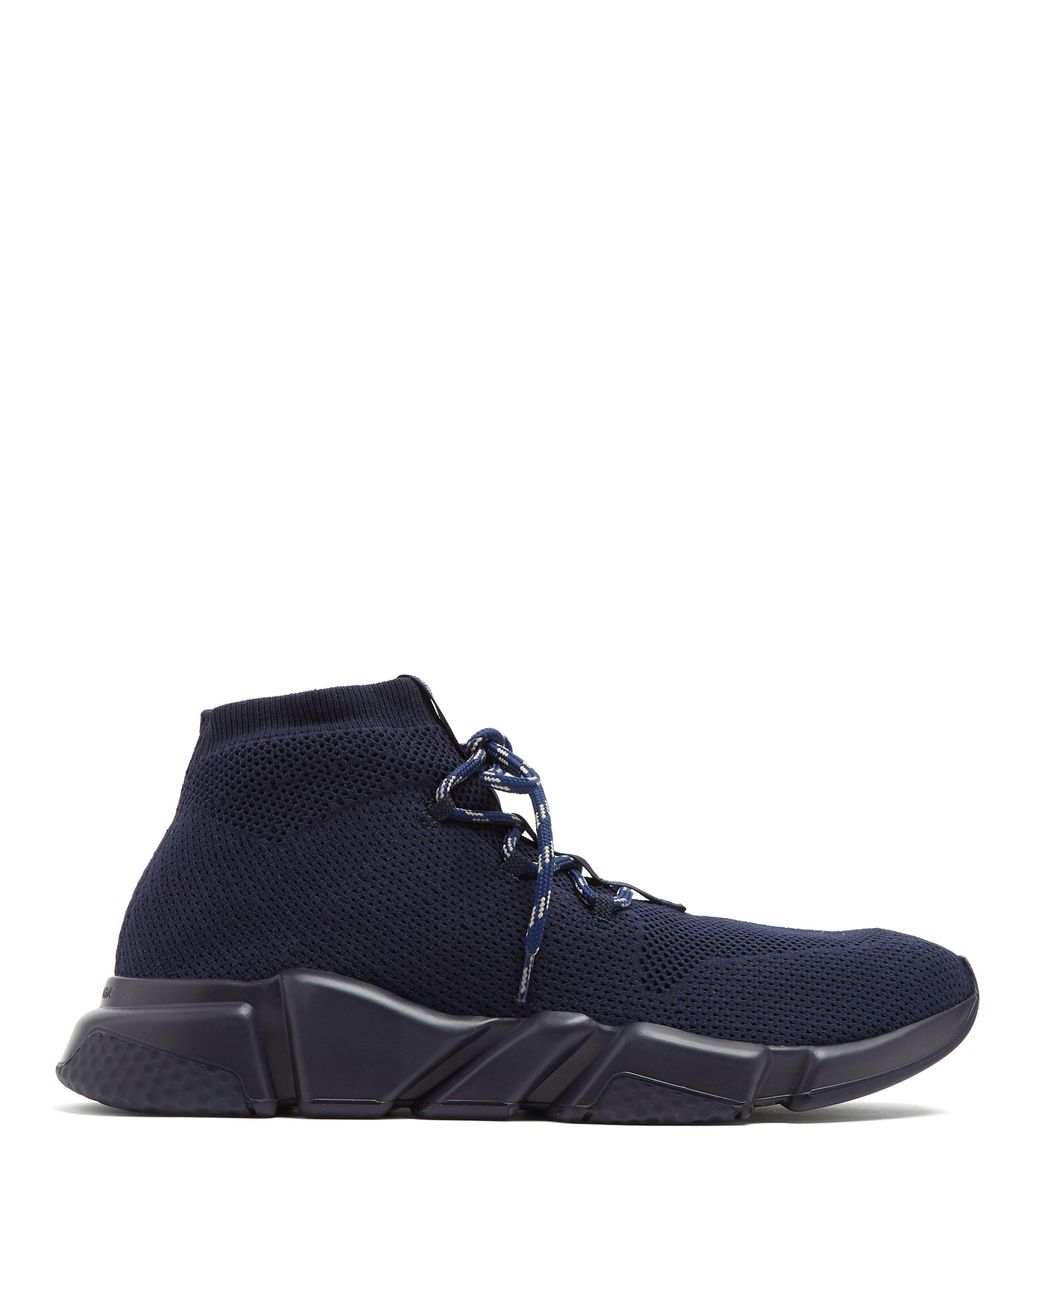 Baskets à lacets Speed 2.0 Matchesfashion Homme Chaussures Baskets 